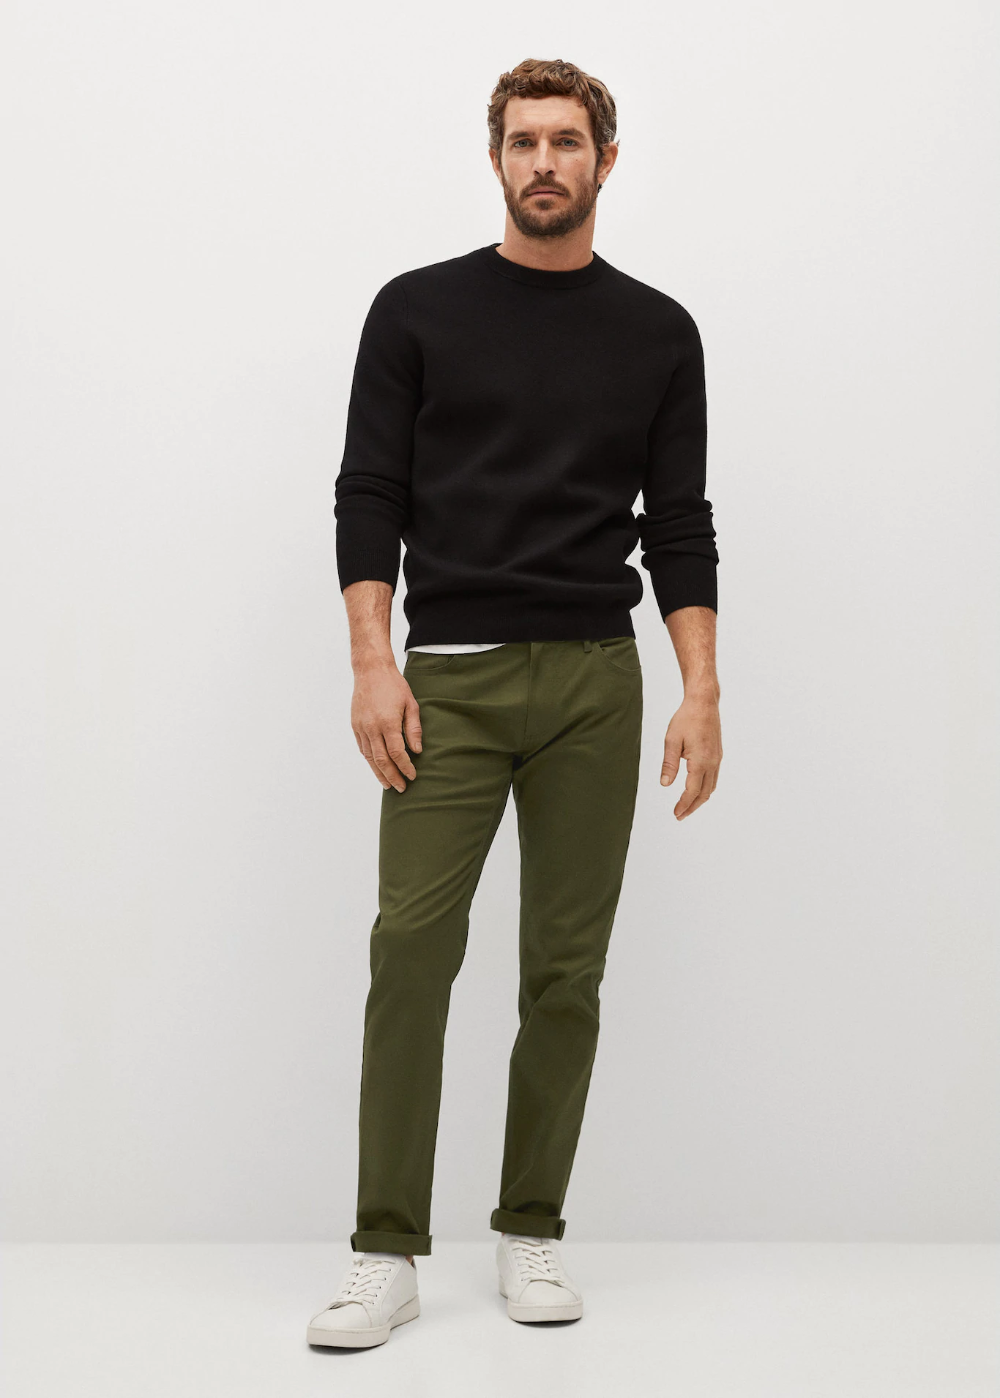 What are mens chinos and how to wear them